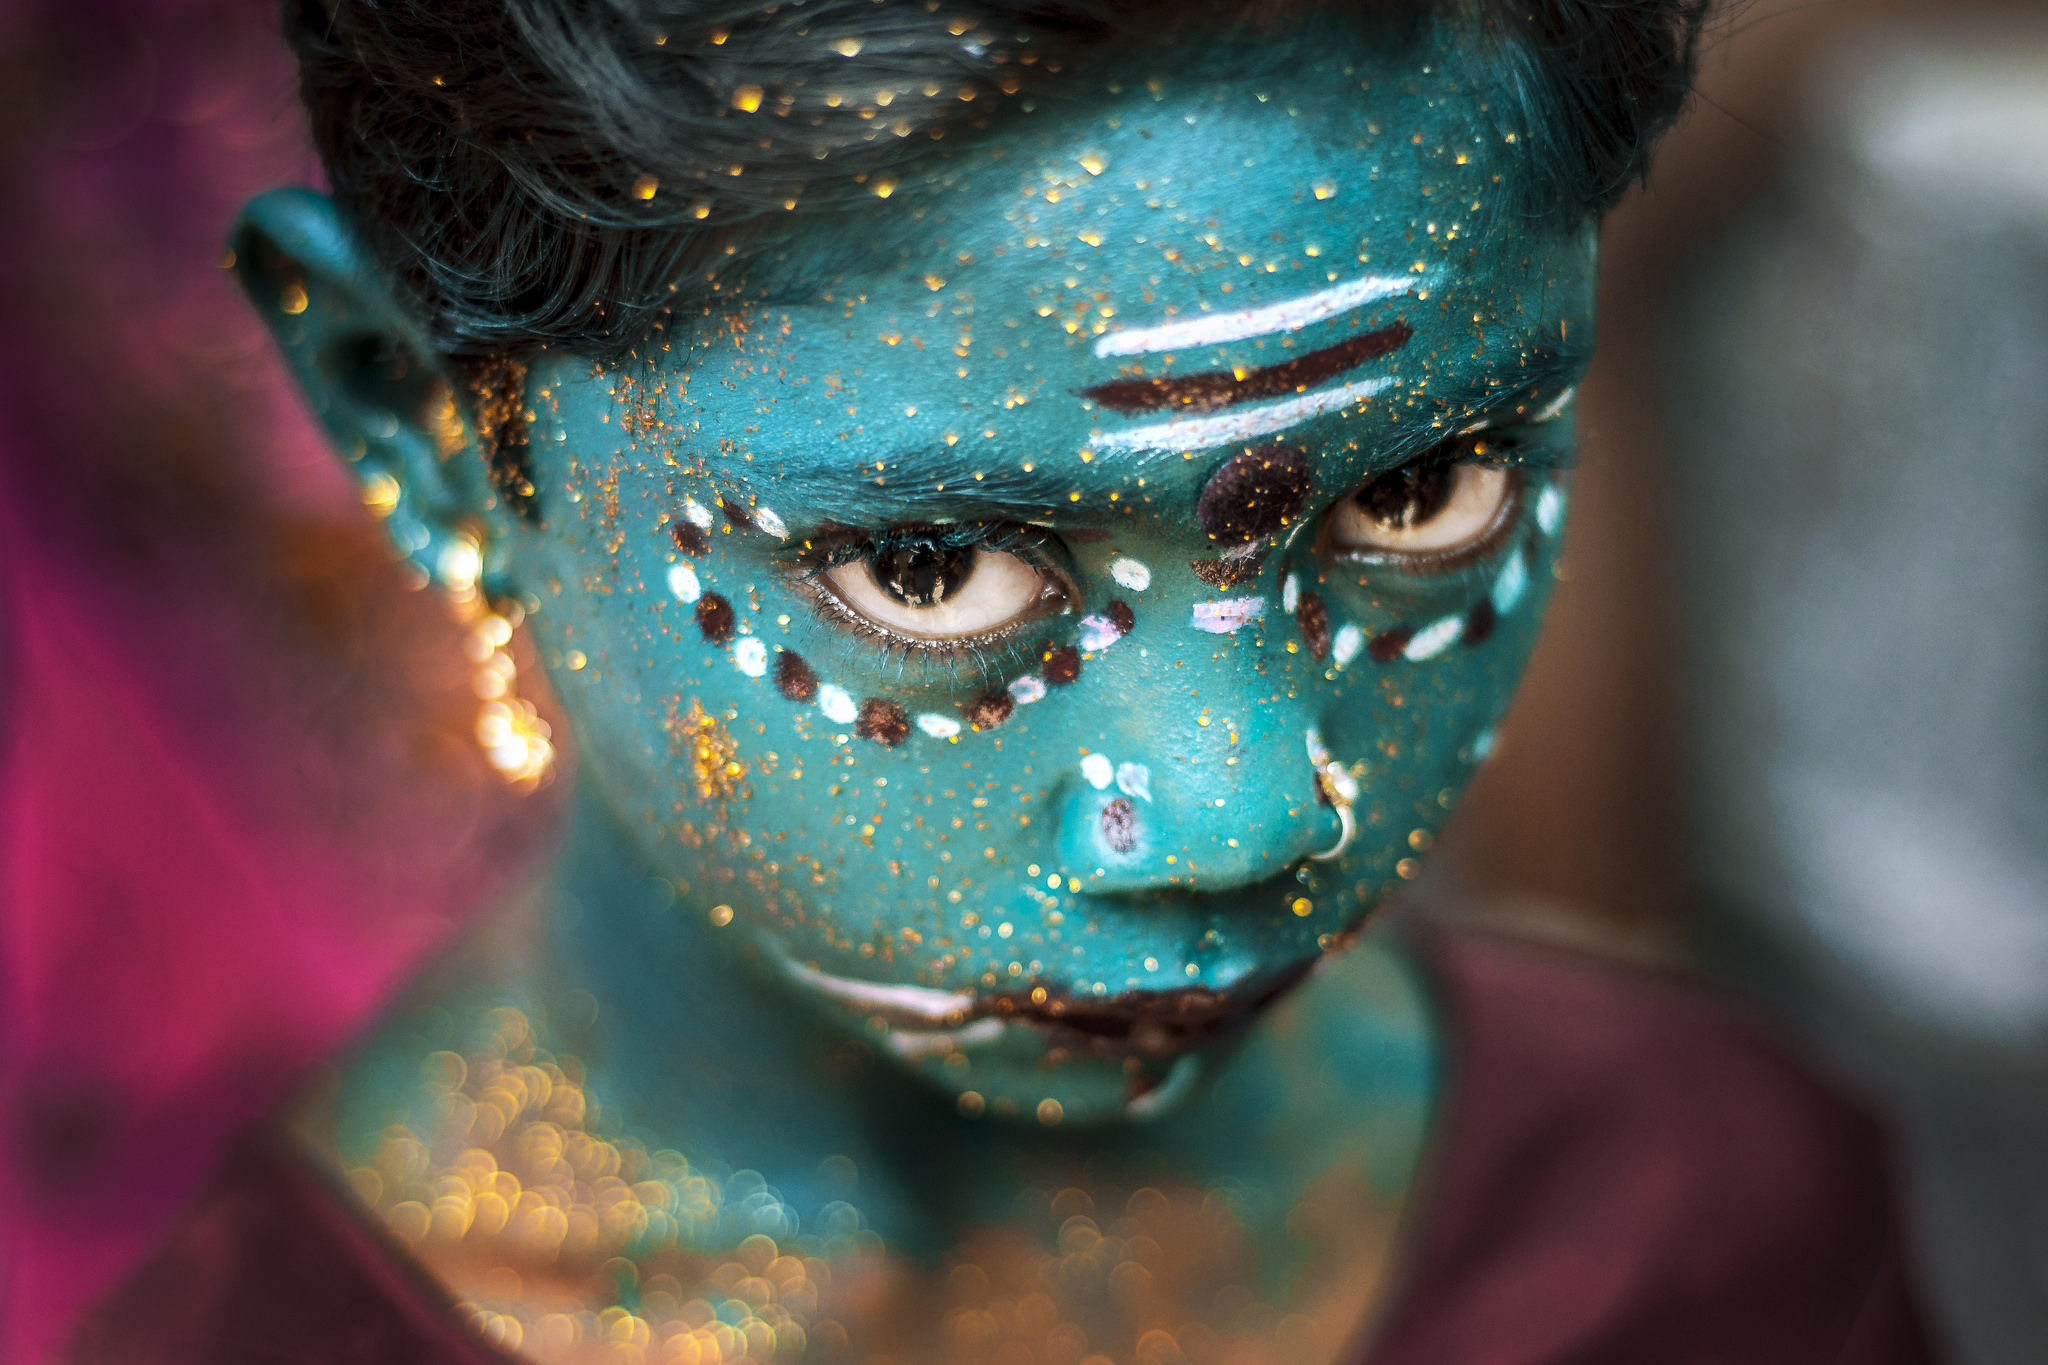 23. A girl with a face painted in aquamarine during the Maha Shivaratri in Kaveripattinam, India